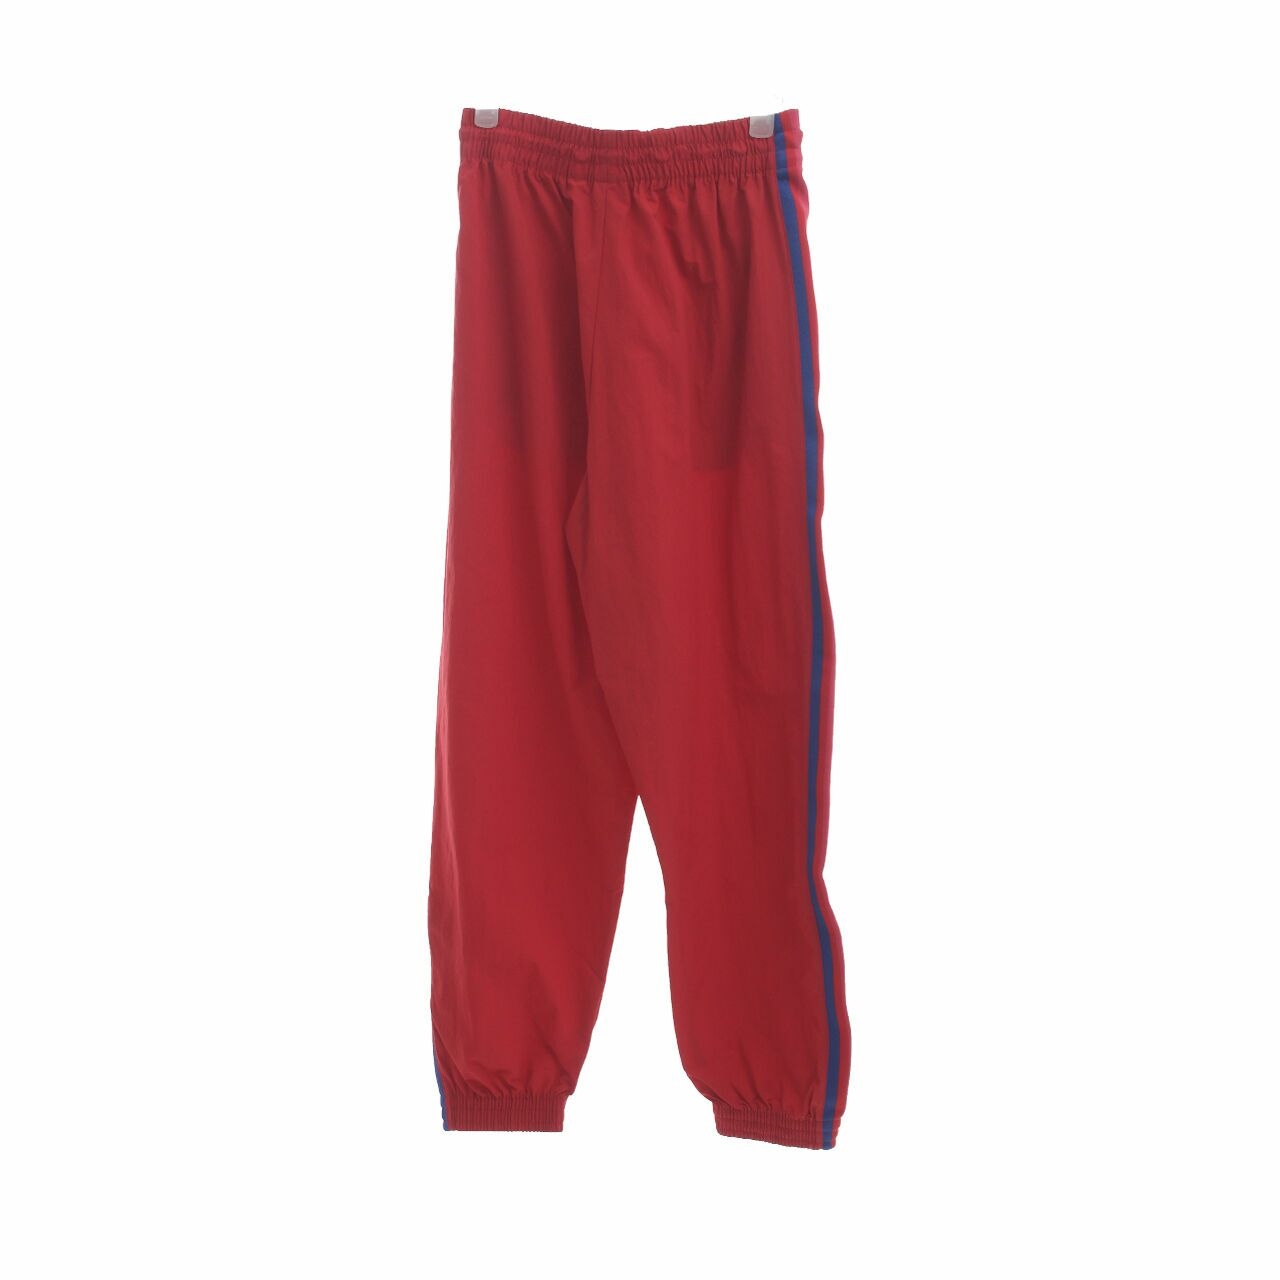 Adidas Red Track Long Pants